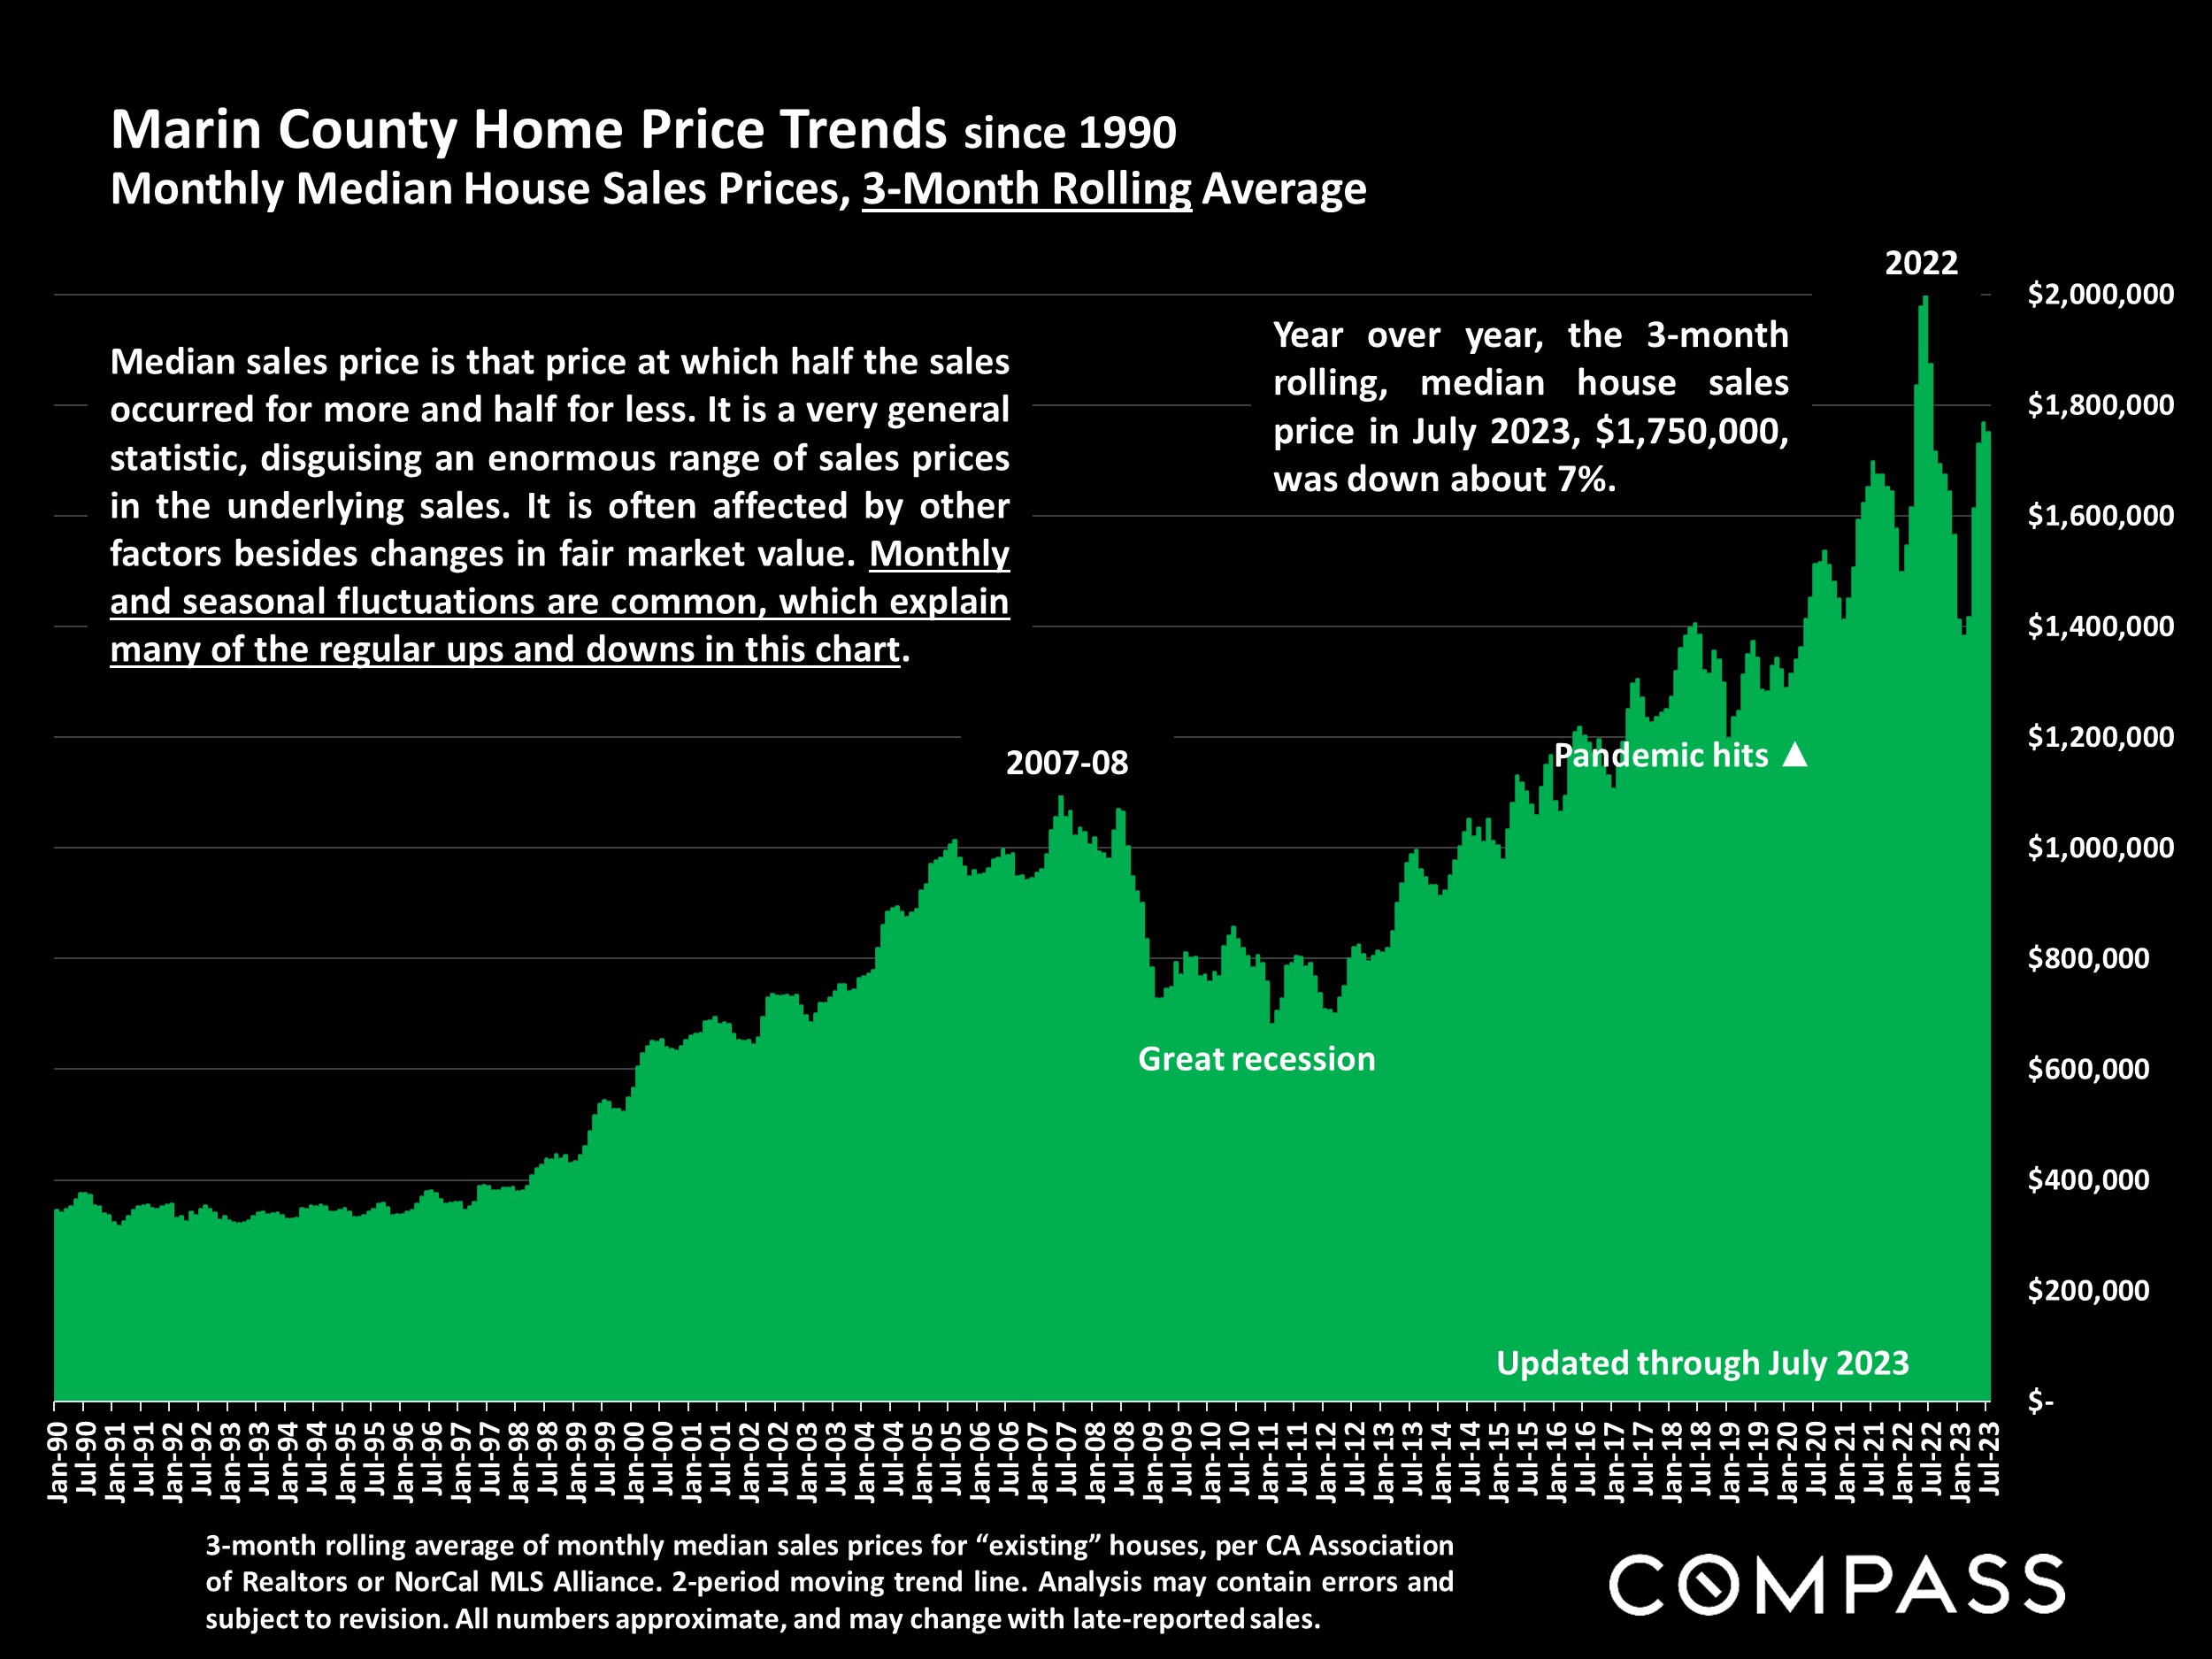 Marin County Home Price Trends since 1990